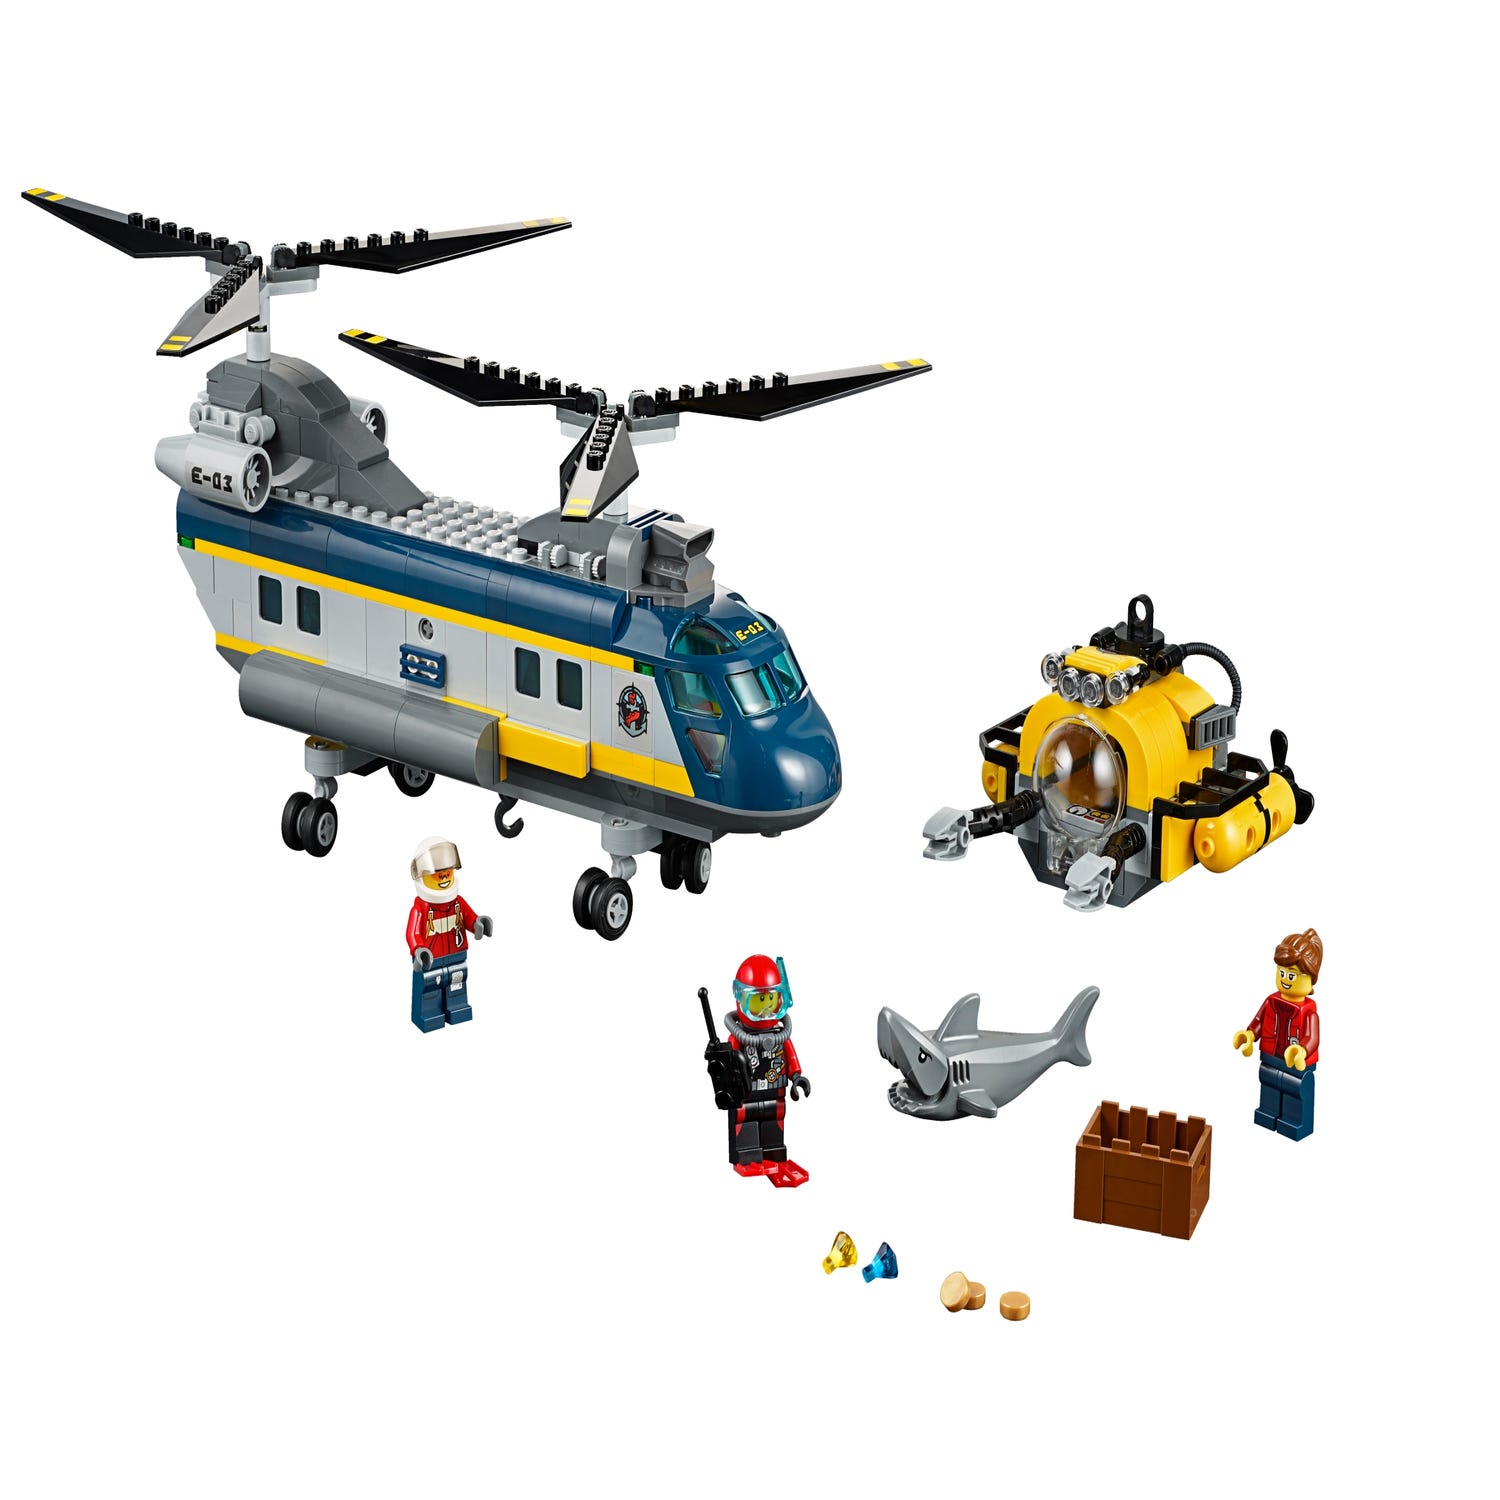 Kano værdi gispende Deep Sea Helicopter 60093 | City | Buy online at the Official LEGO® Shop US